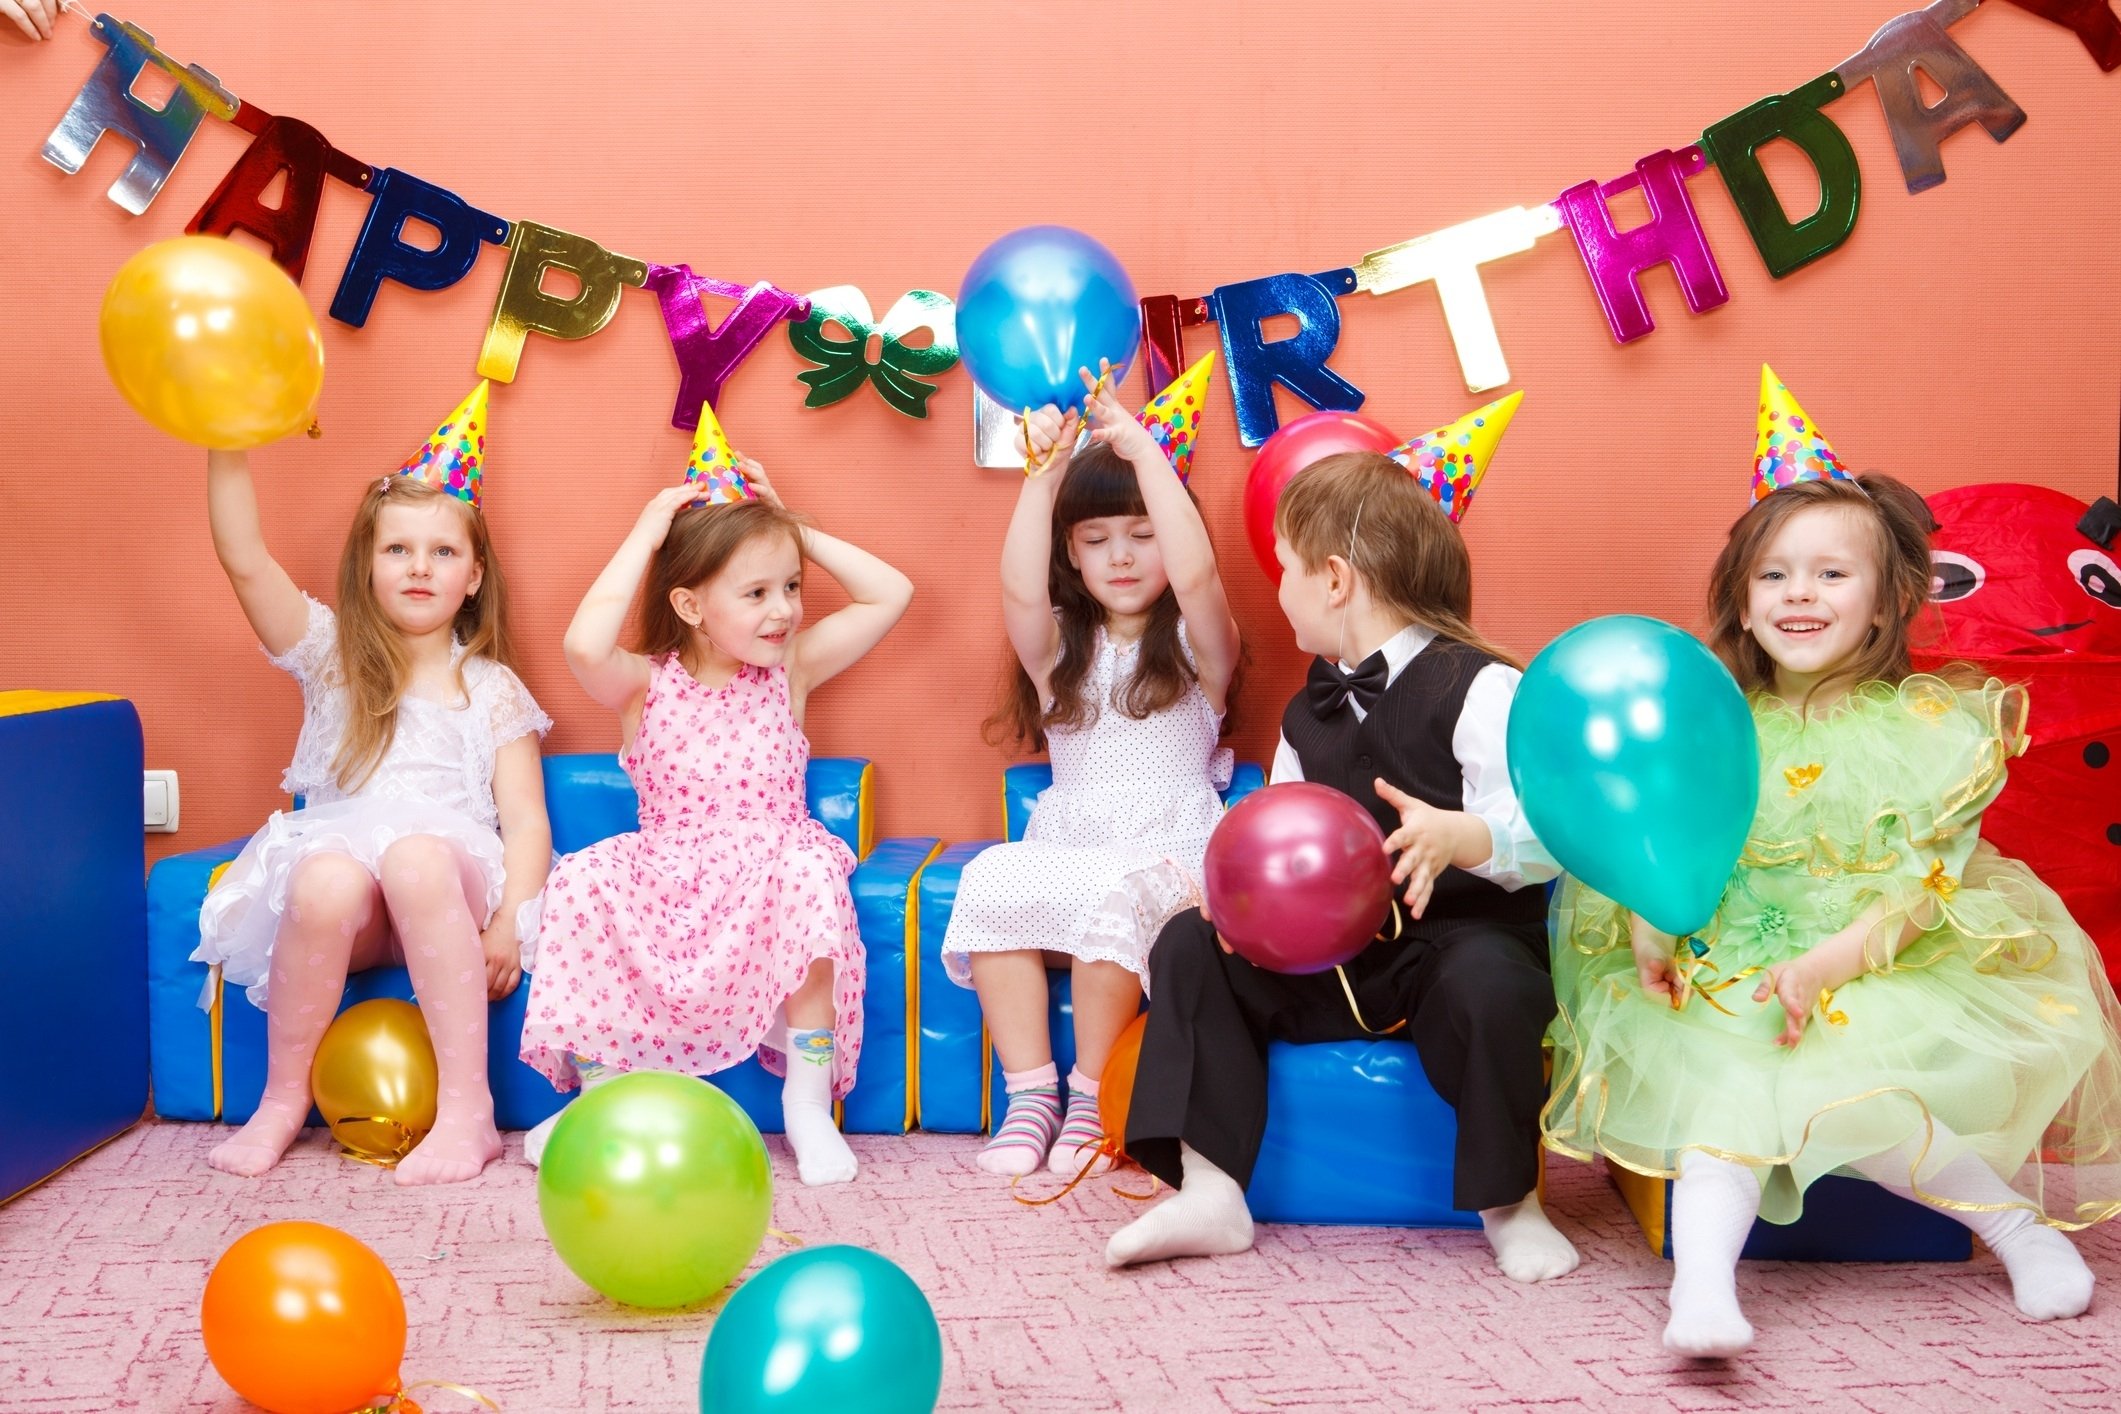 10 Awesome Good Birthday Party Ideas For 12 Year Olds 45 awesome 11 12 year old birthday party ideas birthday inspire 3 2023